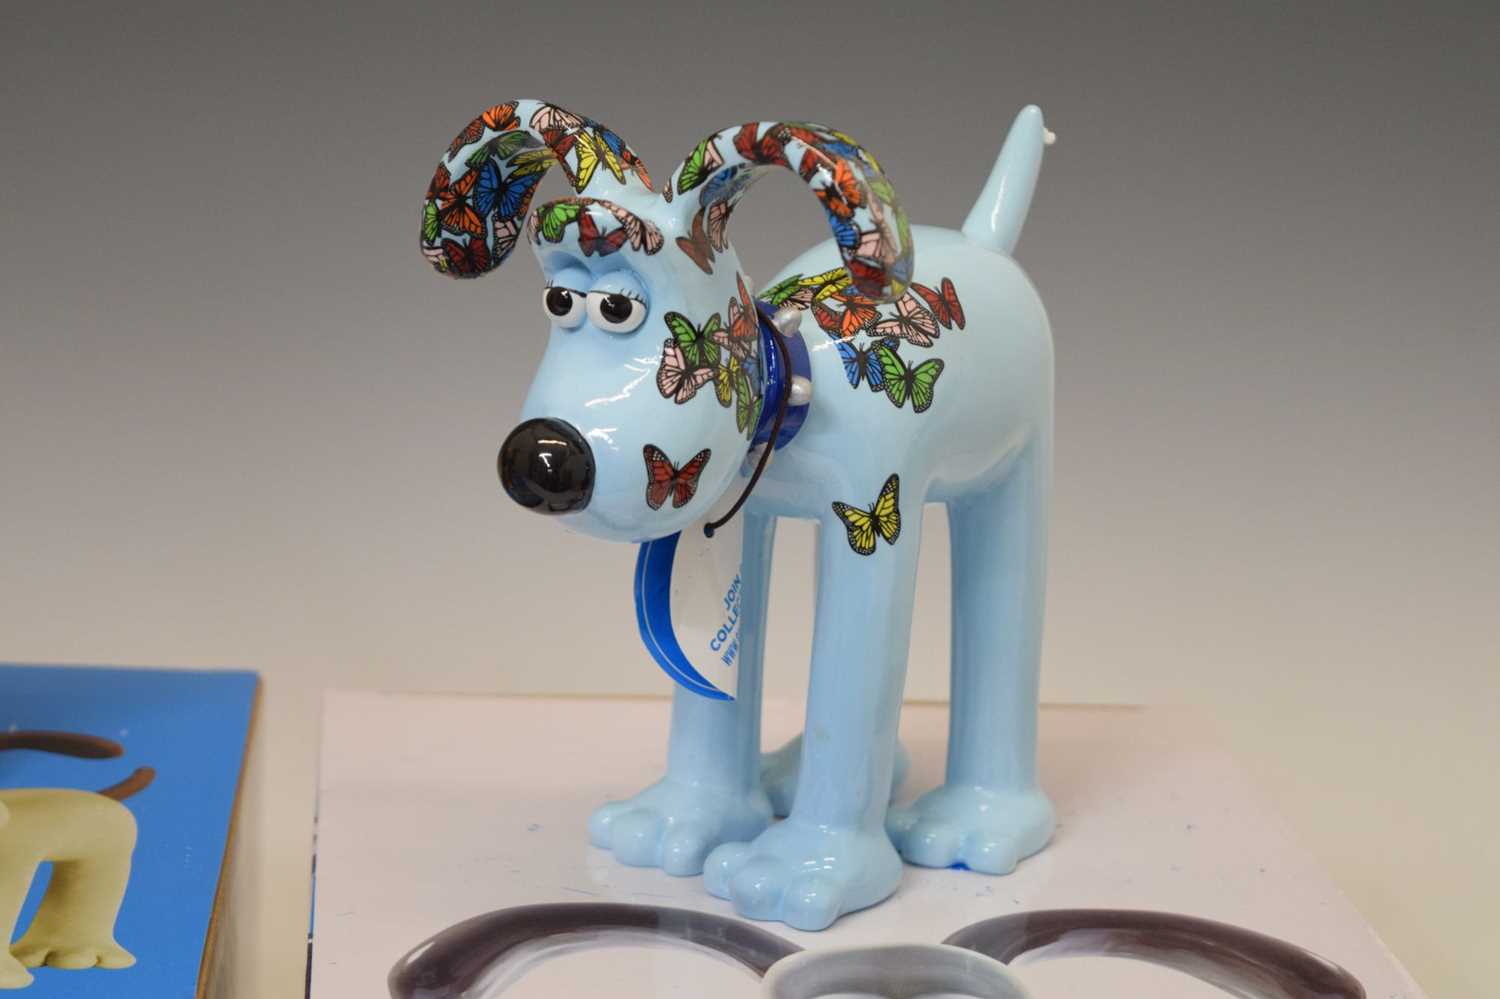 Aardman/Wallace and Gromit - 'Gromit Unleashed' figures - Image 7 of 11